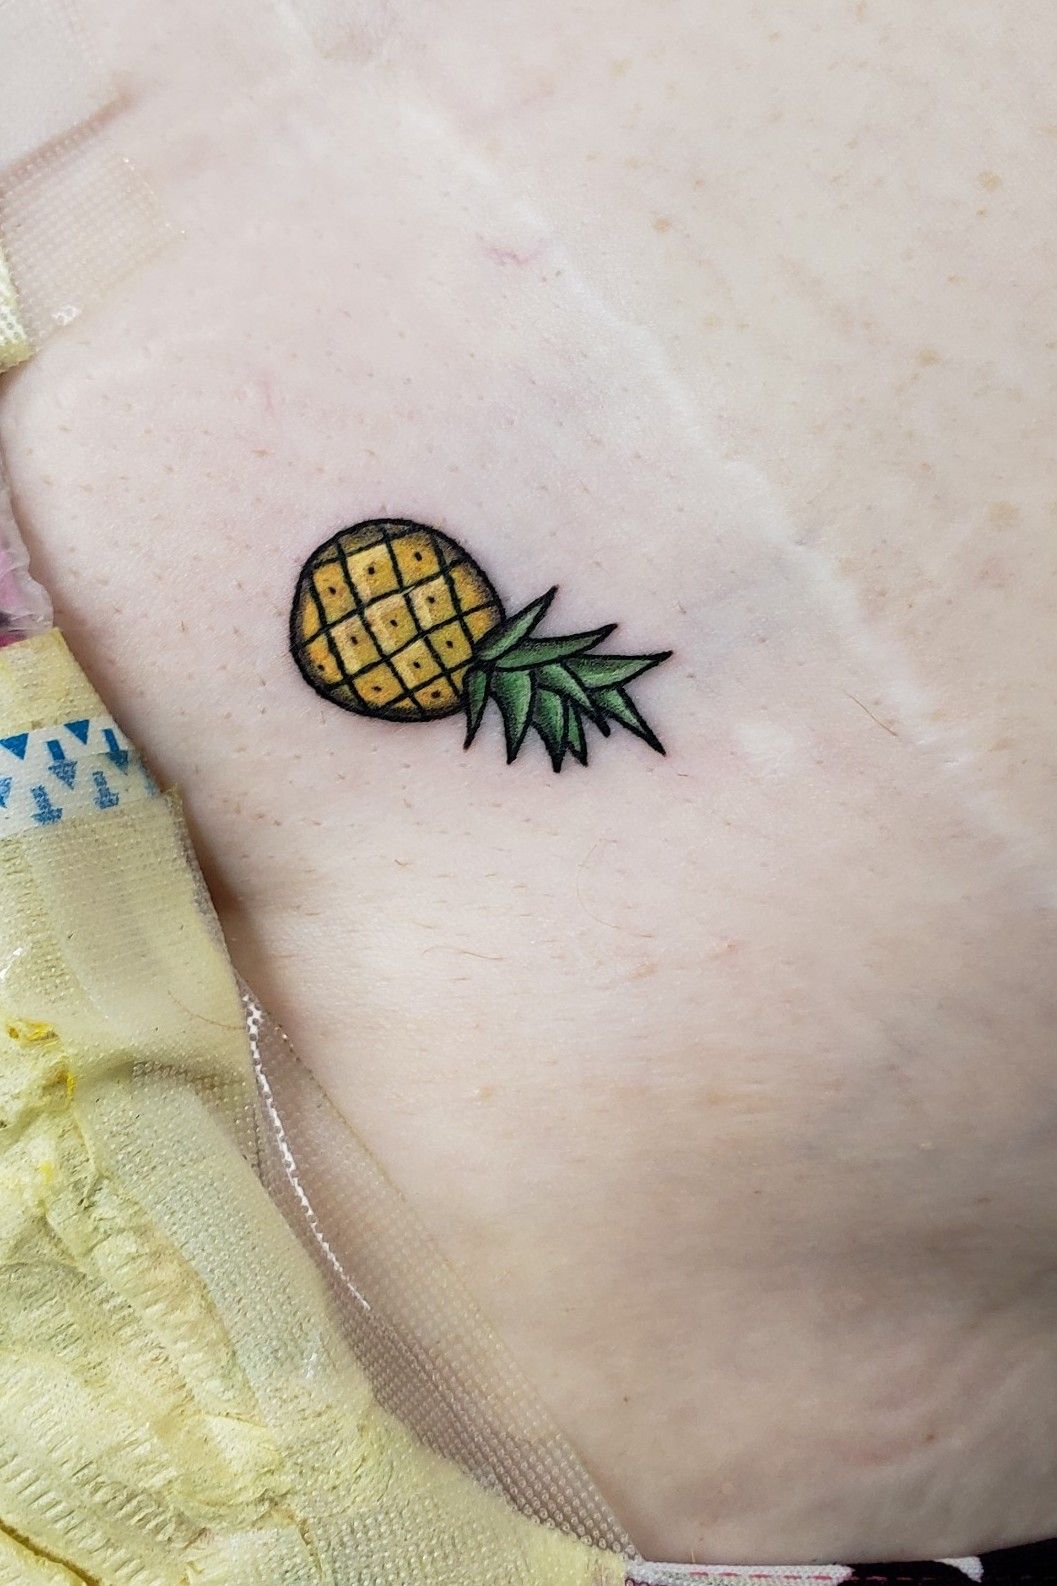 Pineapples are a symbol of hospitality, and the hospitality industry. Last  year I celebrated my 10th year in the industry, and decided to commemorate  it. By: Vanessa Harper at Endless Summer Tattoo